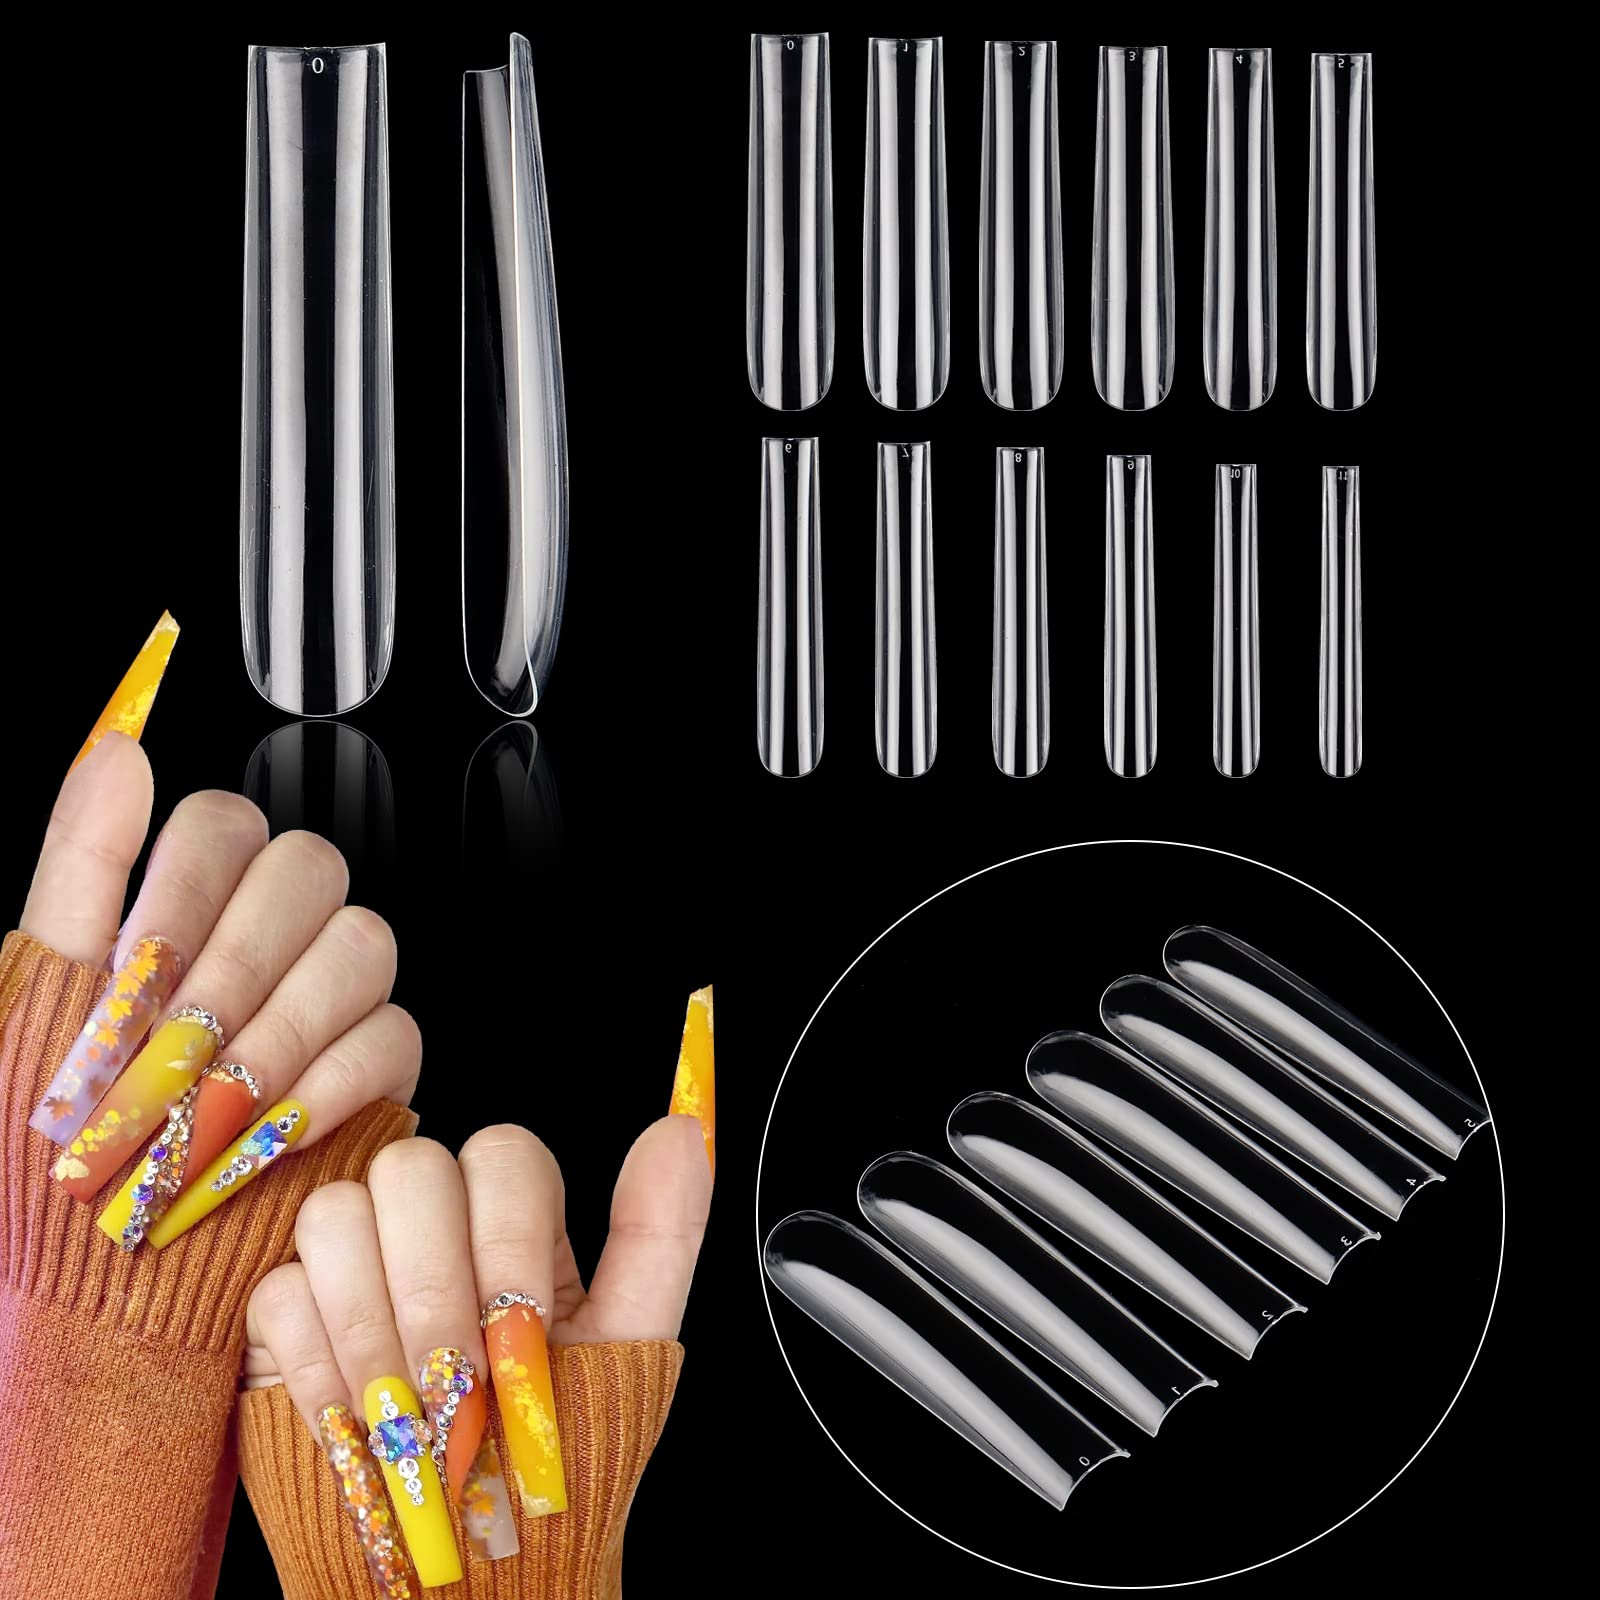 Buy 100 Pieces Artificial Transparent Nails Set, False Nails Tips 10 Sizes  Fake Acrylic Nail Kit with 3g Nail Glue Online at Low Prices in India -  Amazon.in